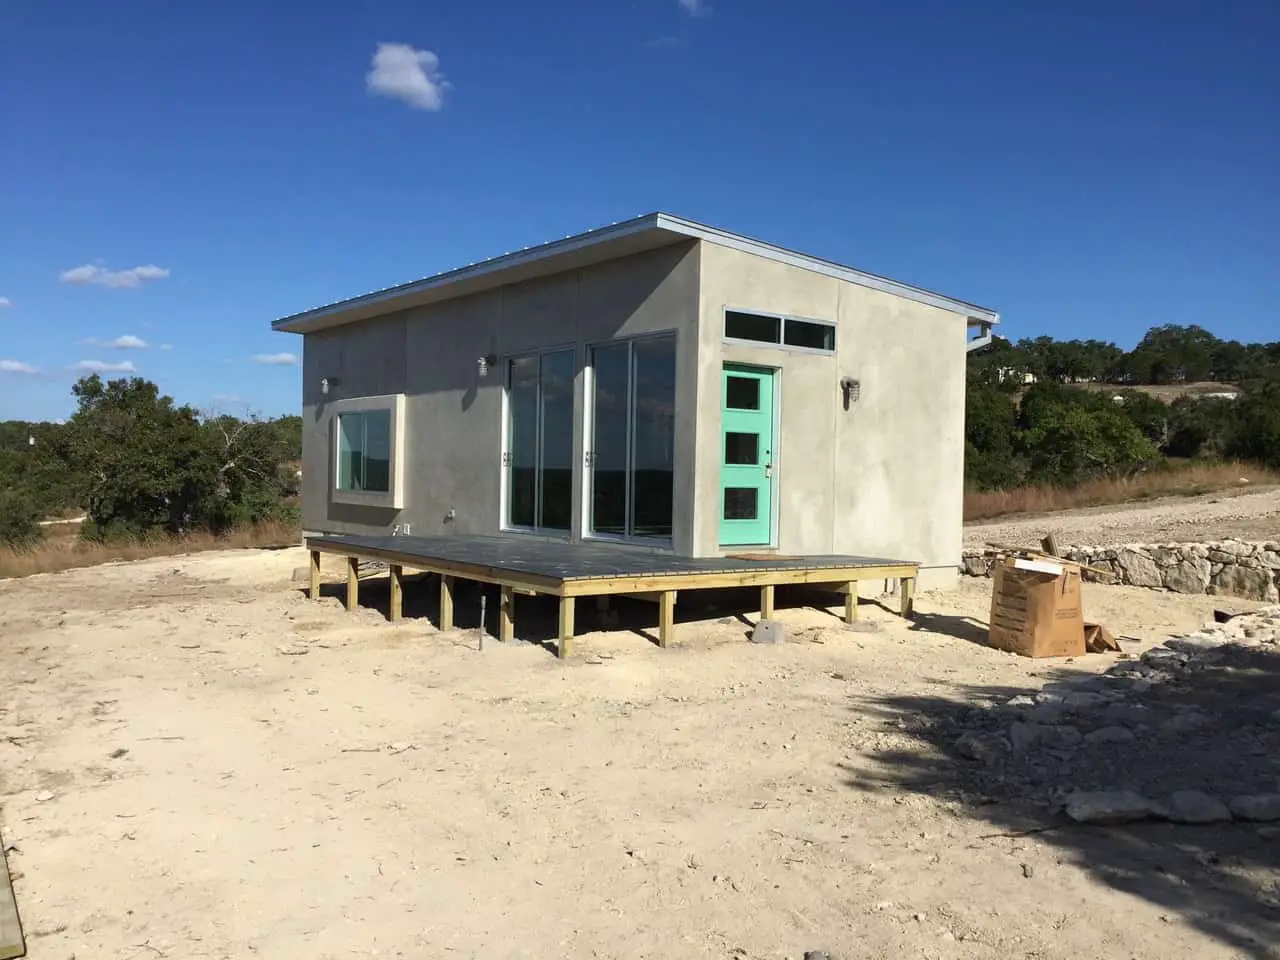 MA Modular Grand-Ma prefab home model - image of rear exterior and deck after construction complete.